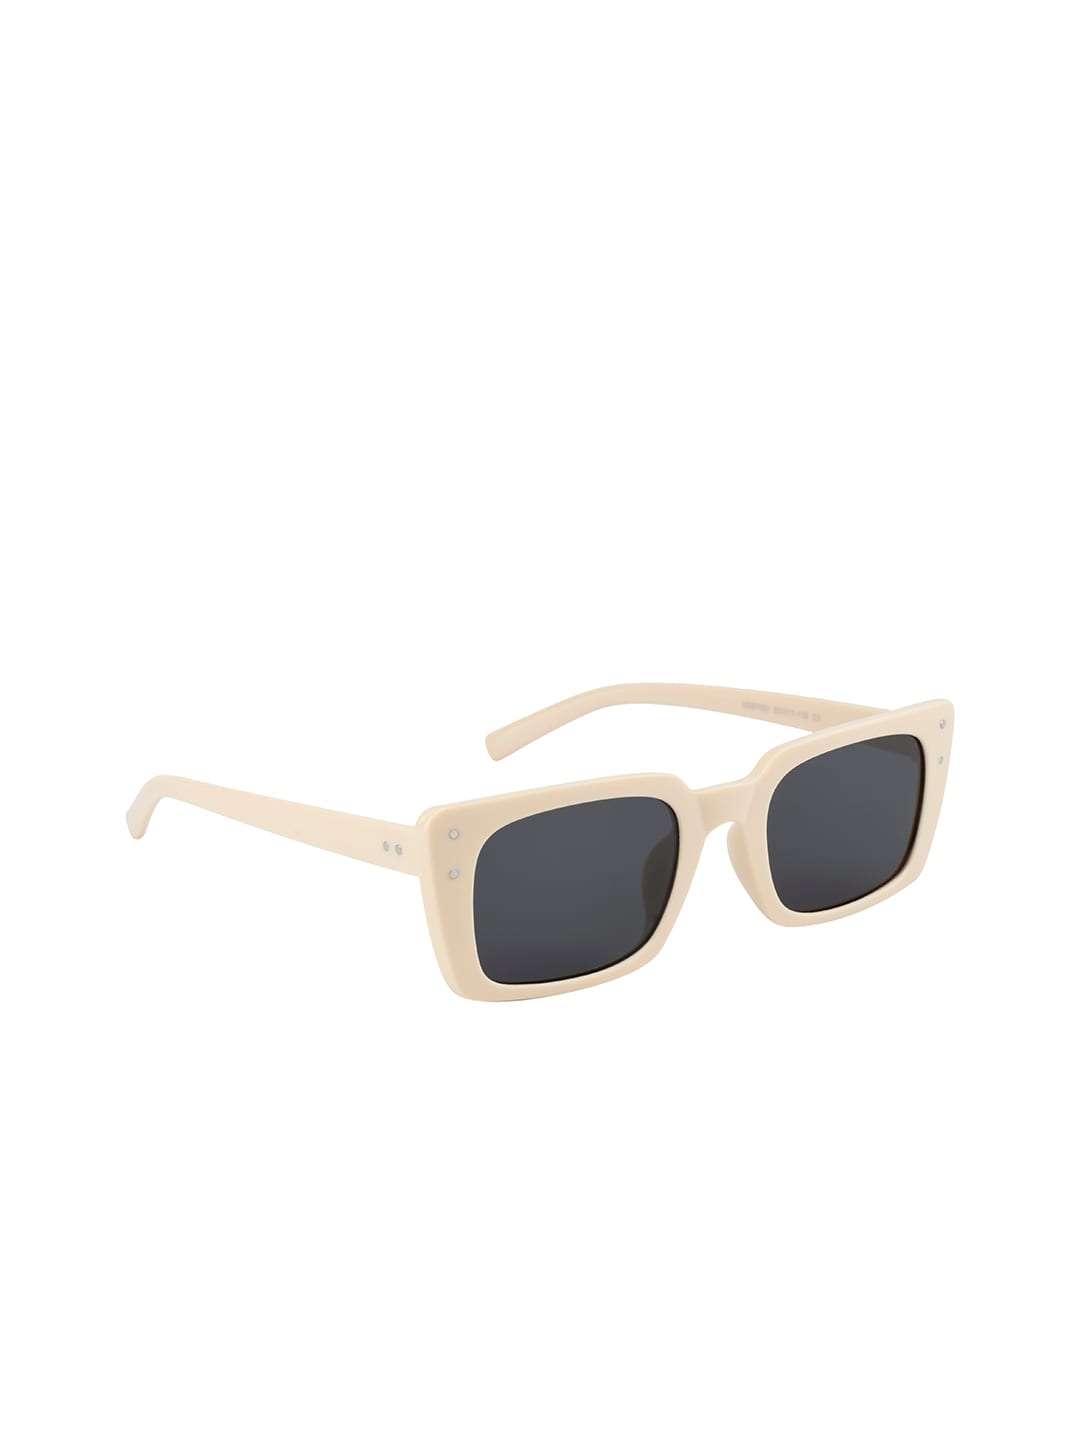 Ted Smith Unisex Grey Lens & Gold-Toned Square Sunglasses with UV Protected Lens Price in India